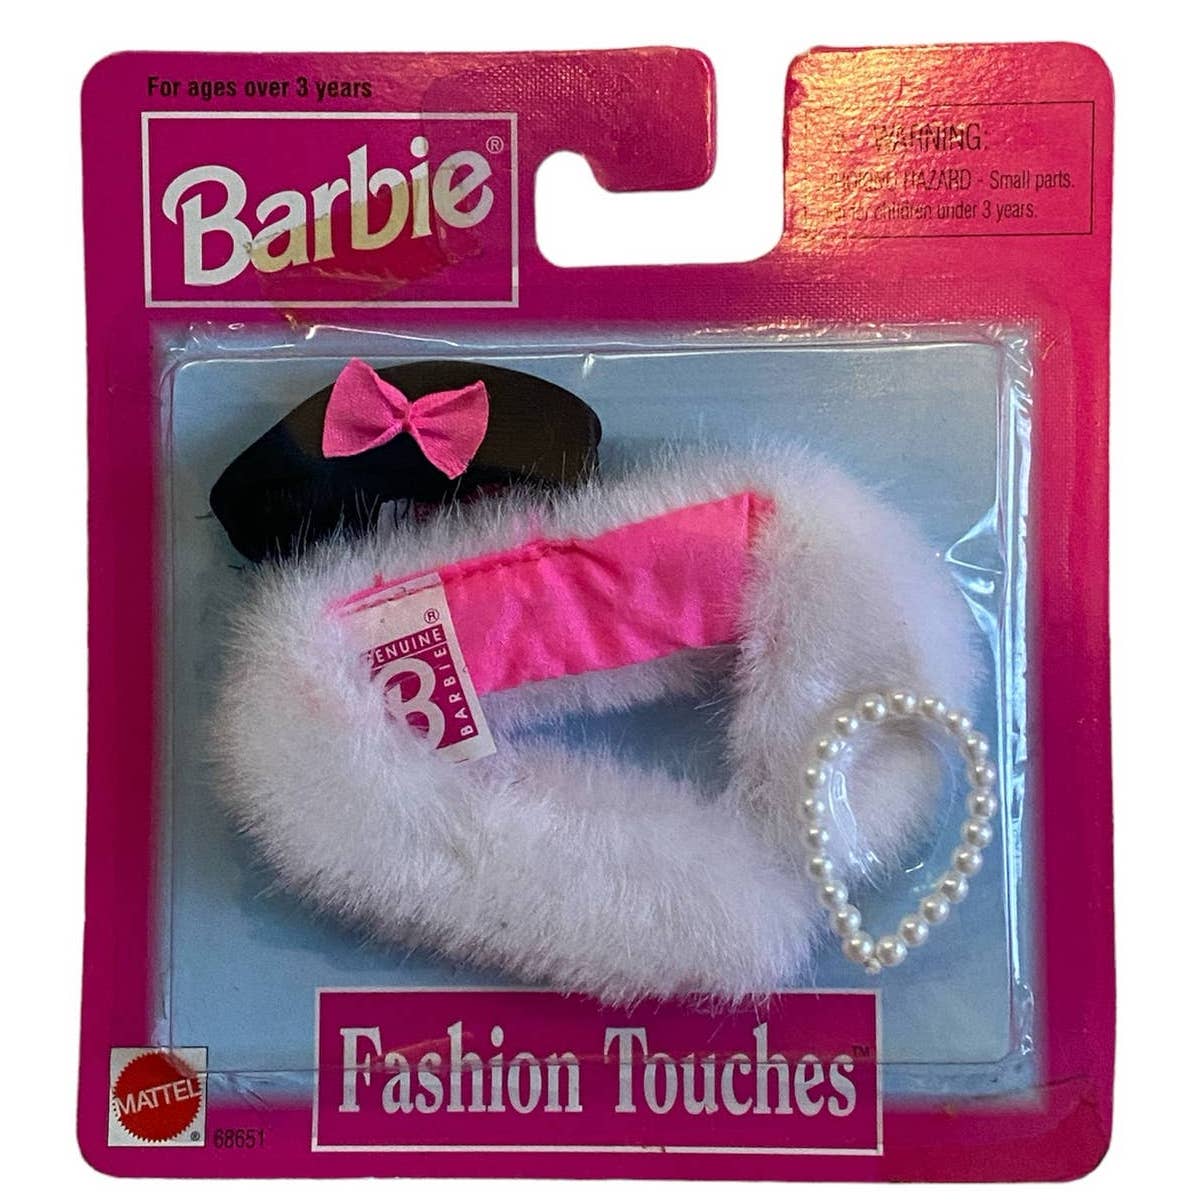 2 Pcs Barbie Fashion Touches Accessories 1997 Lace Tights Fur Shawl Hat Gloves